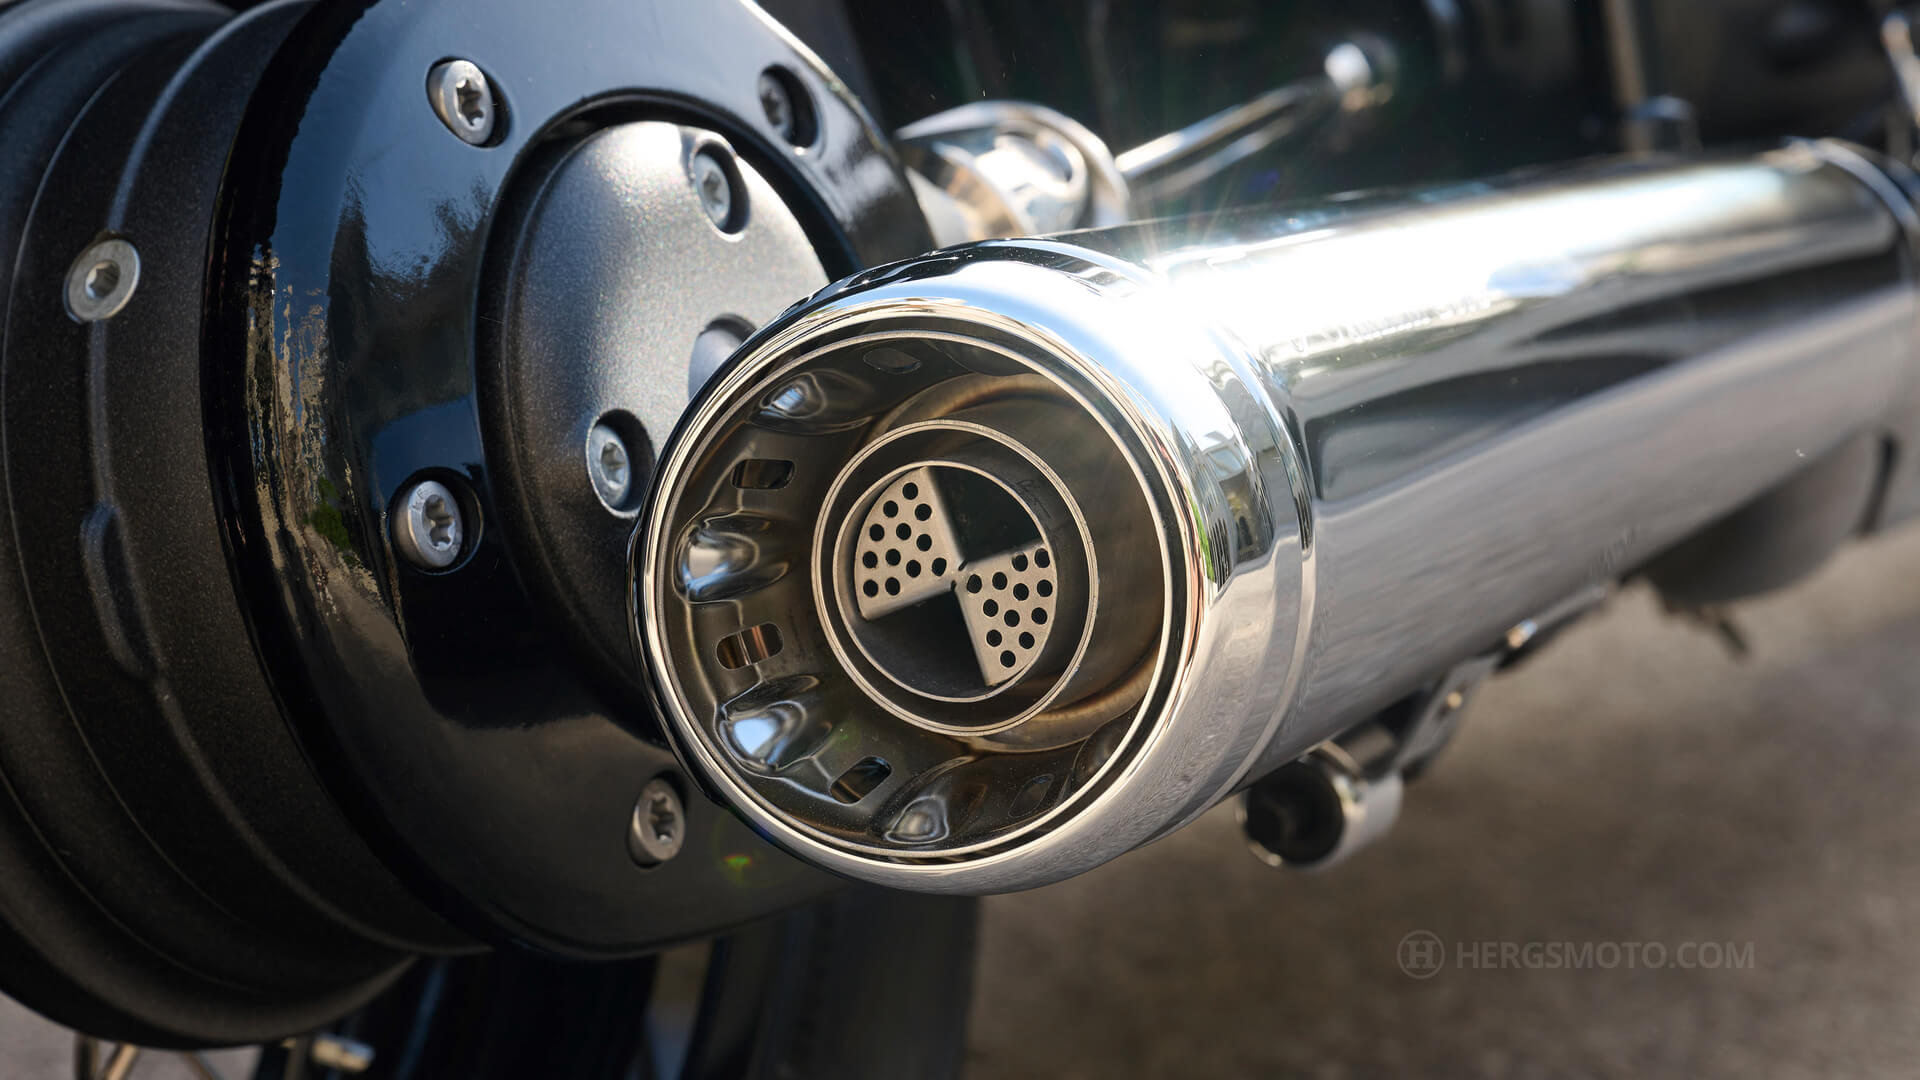 Akrapovič rear silencers with perforated tailpipe